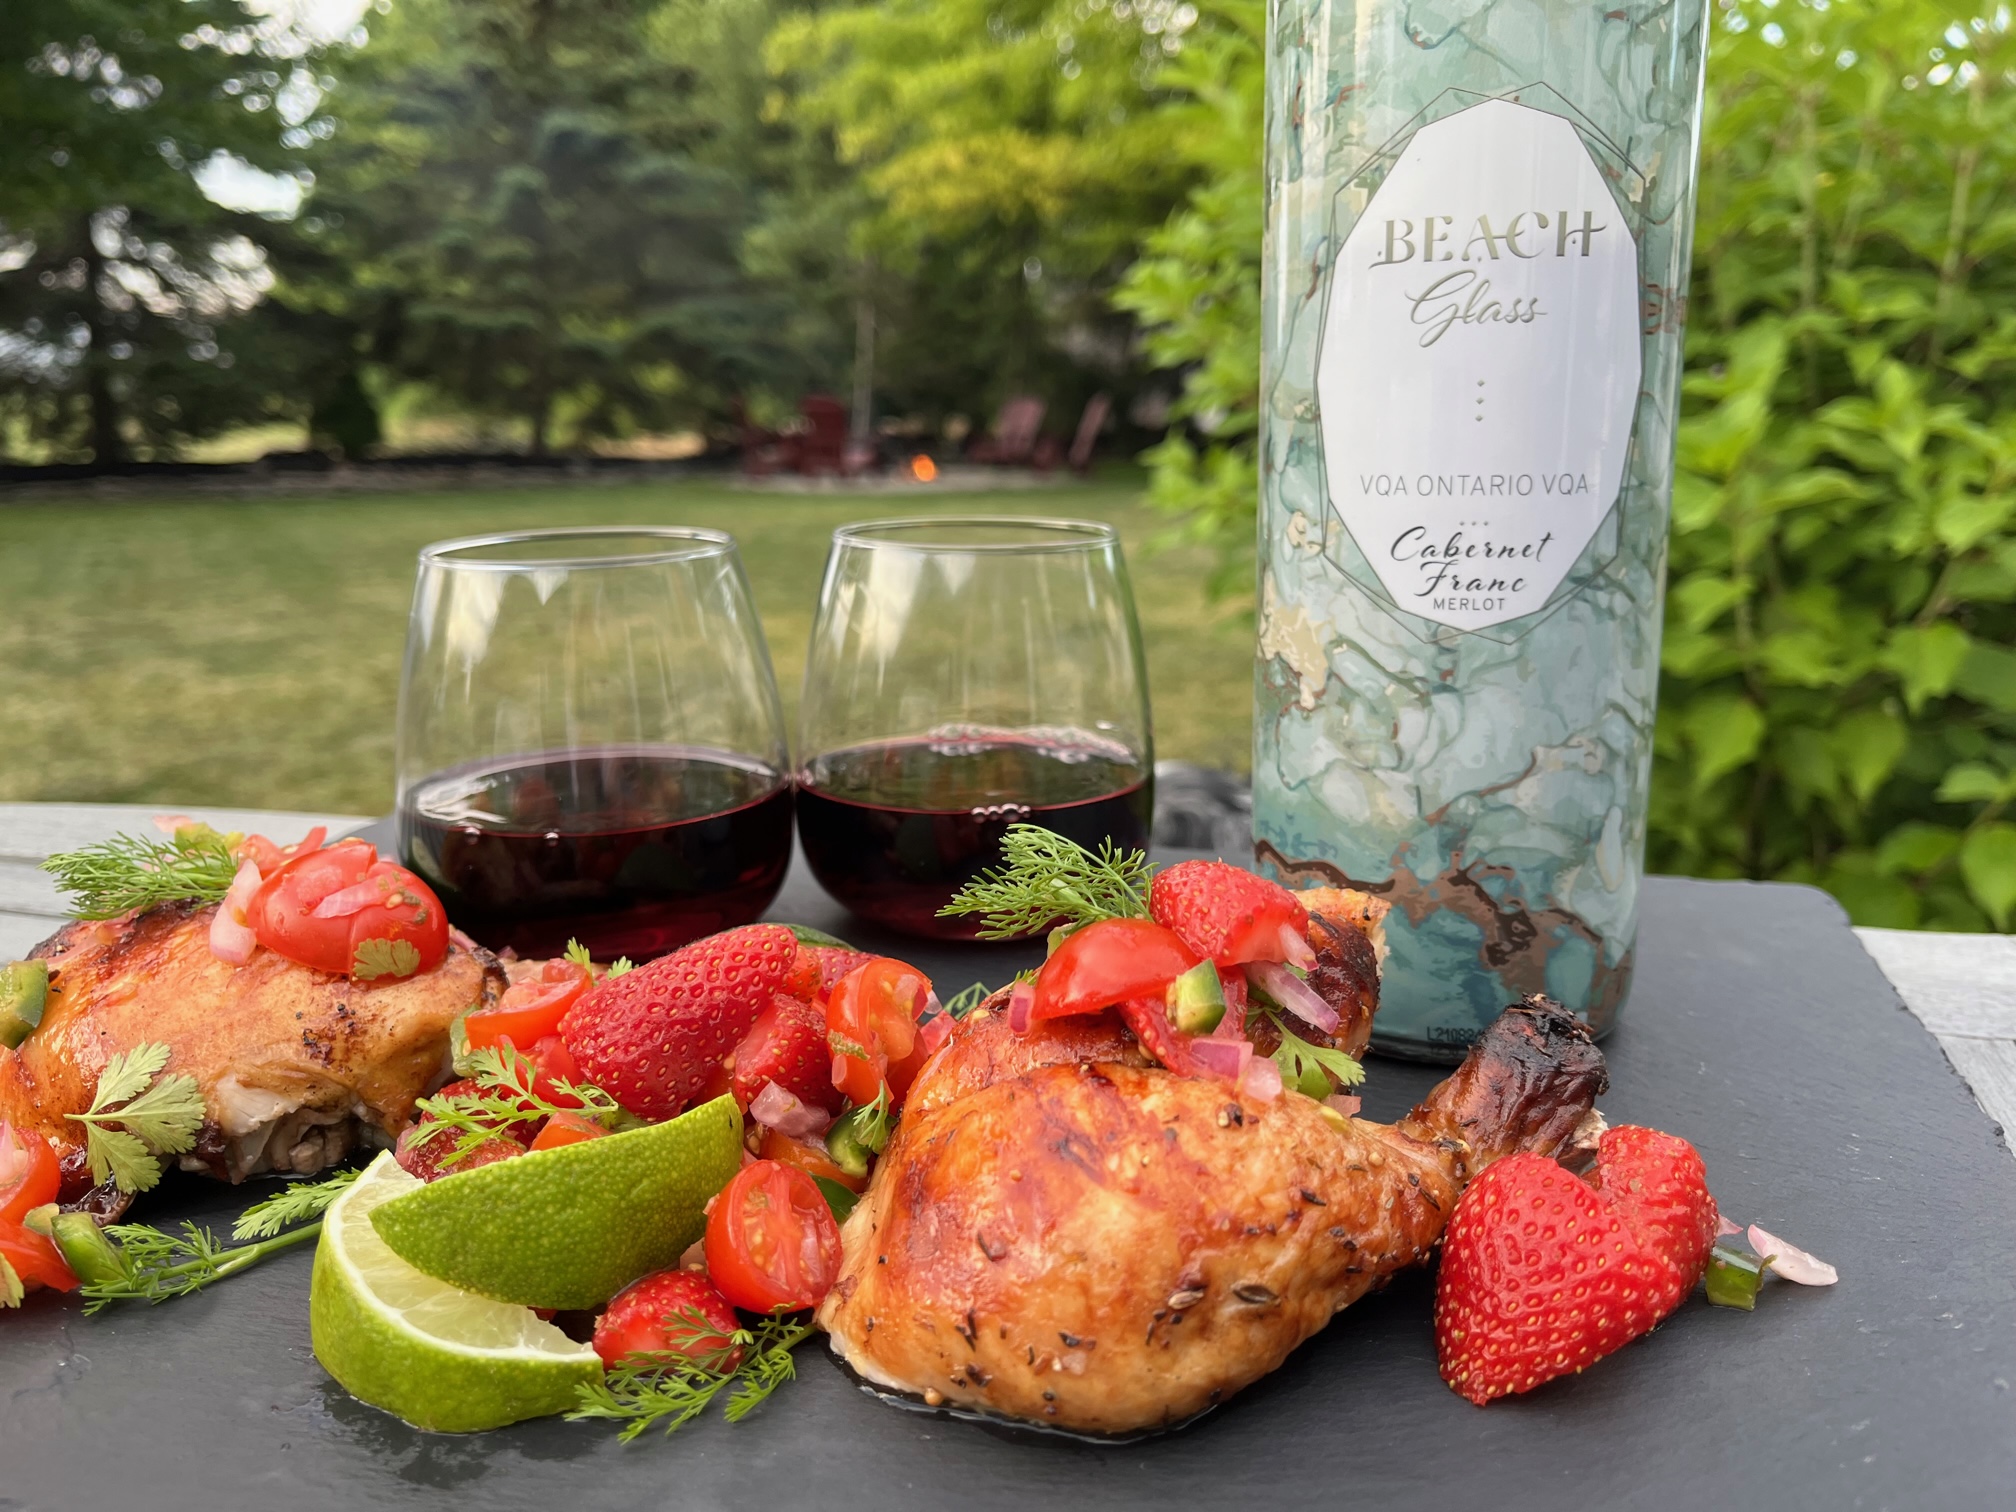 Featured image for “Sprucewood Shores Beach Glass Red Cabernet Merlot with Strawberry Tomato Salsa”